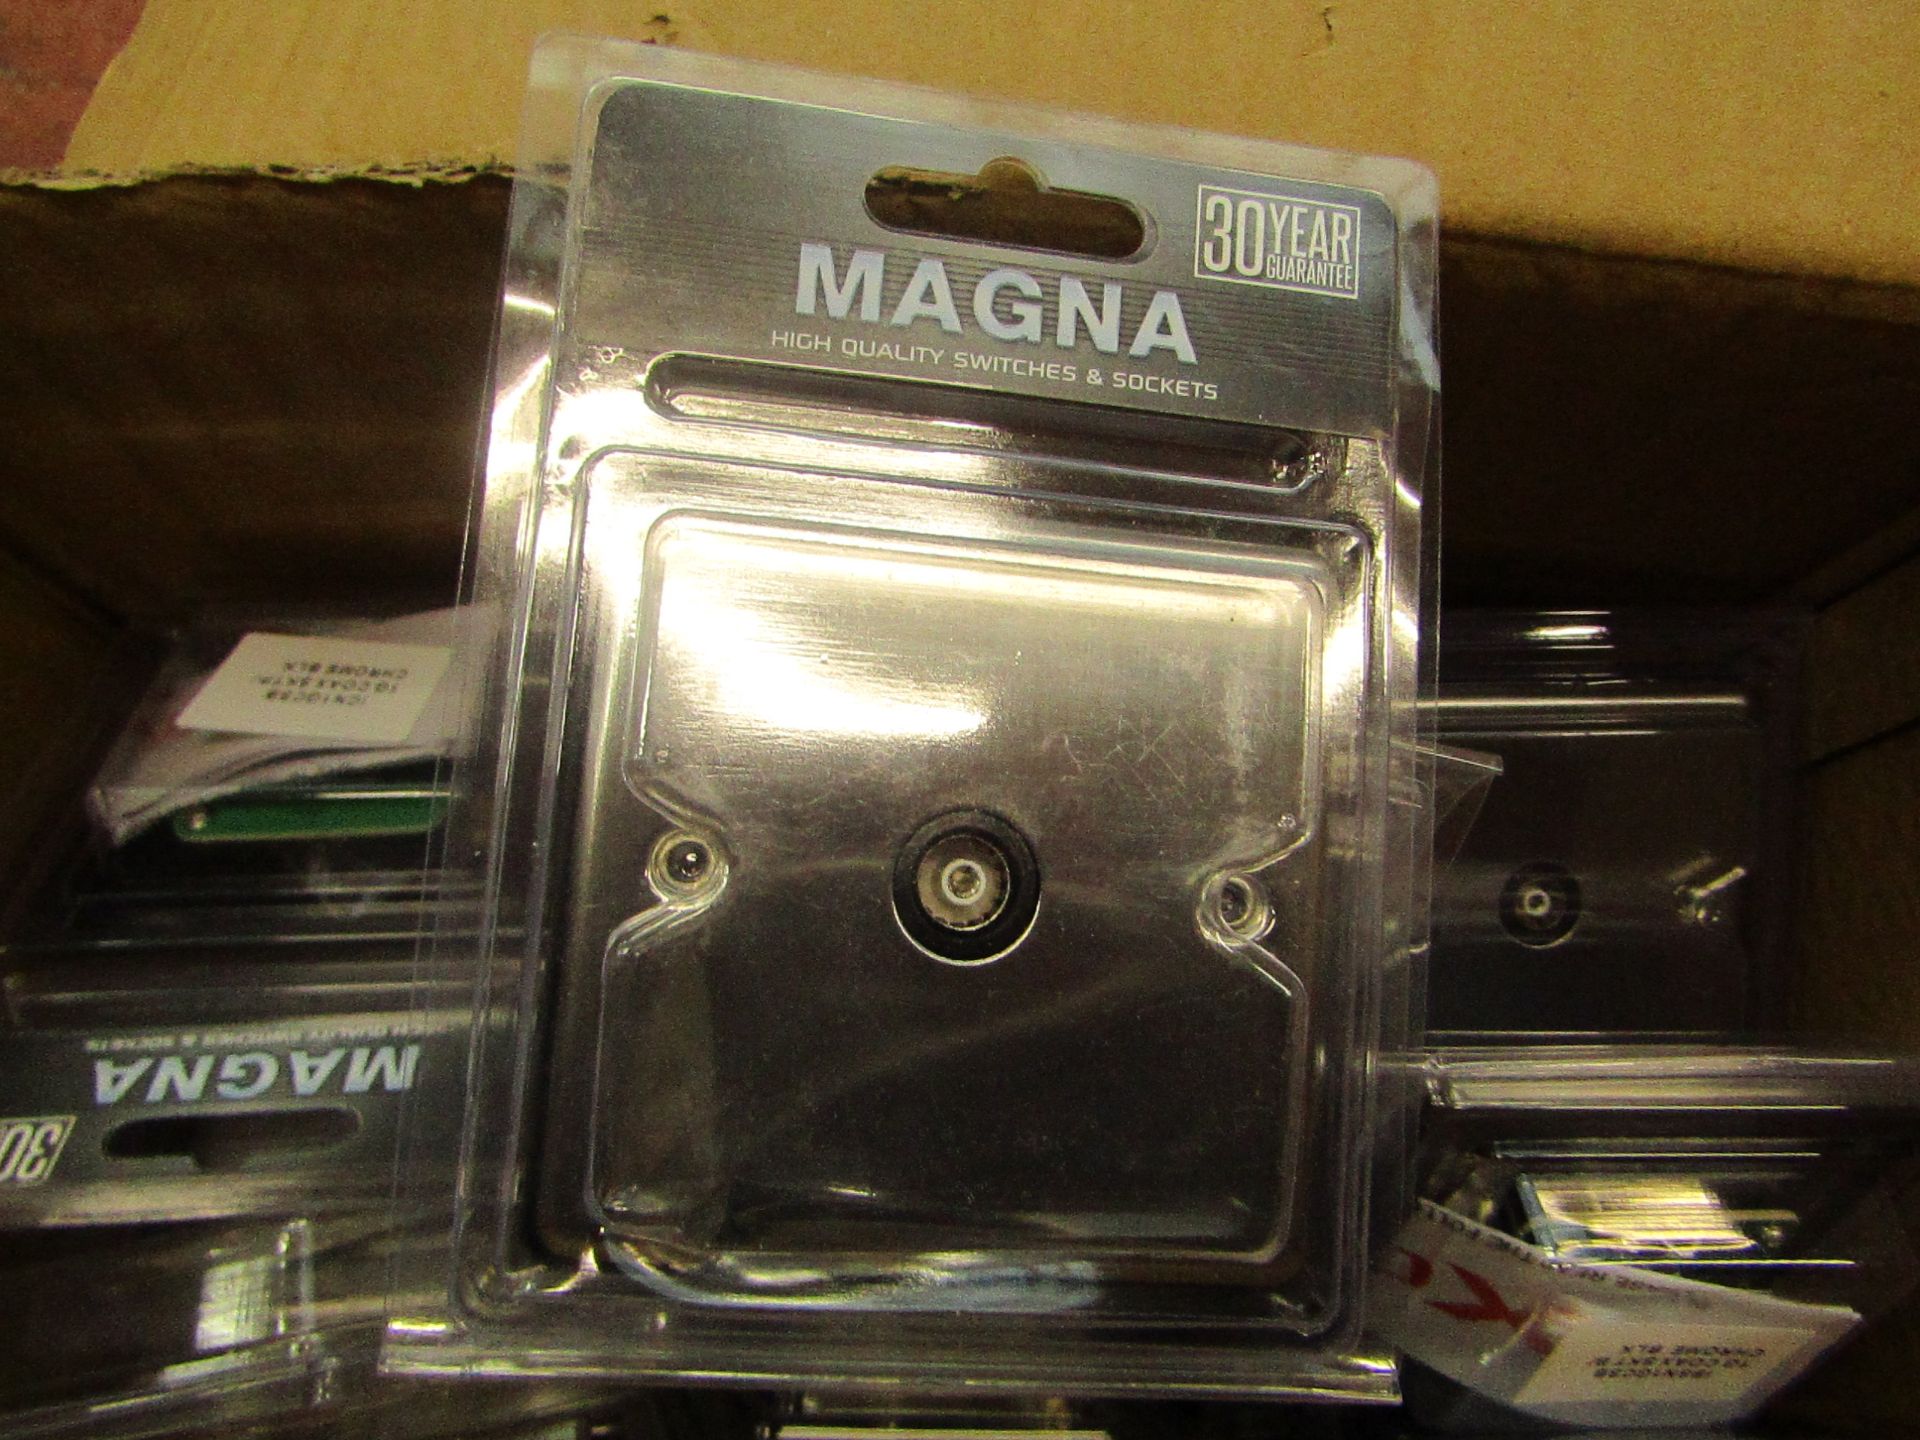 10 x Magna 1G Coax Outlets in Chrome. Packaged